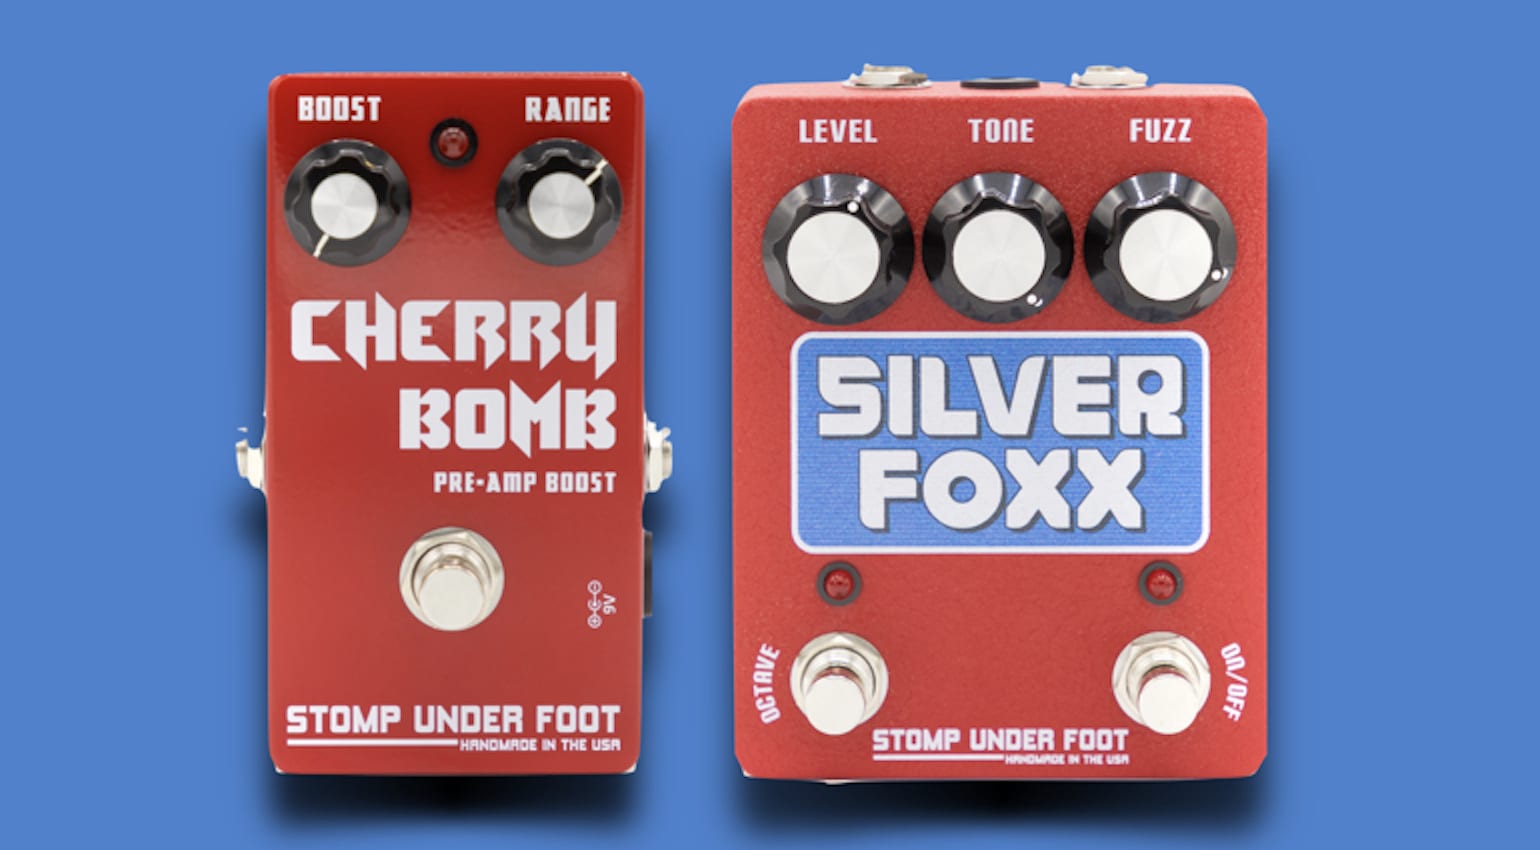 Stomp Under Foot recreates two classic effects with the Silver 